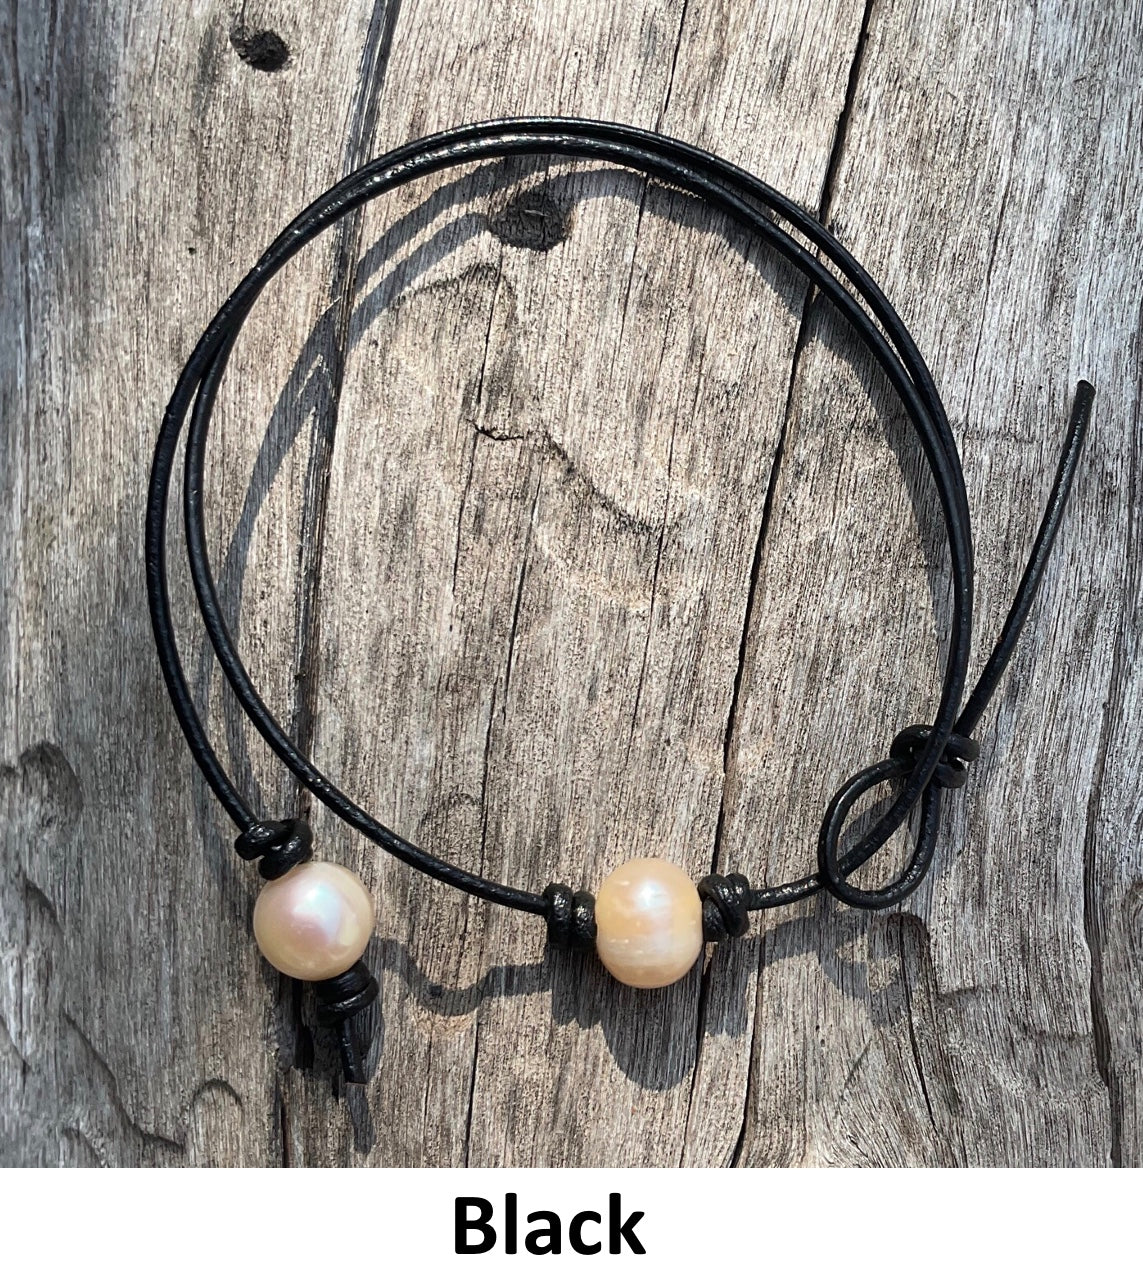 Single Pink Pearl Necklace, #1 Black Leather Cord